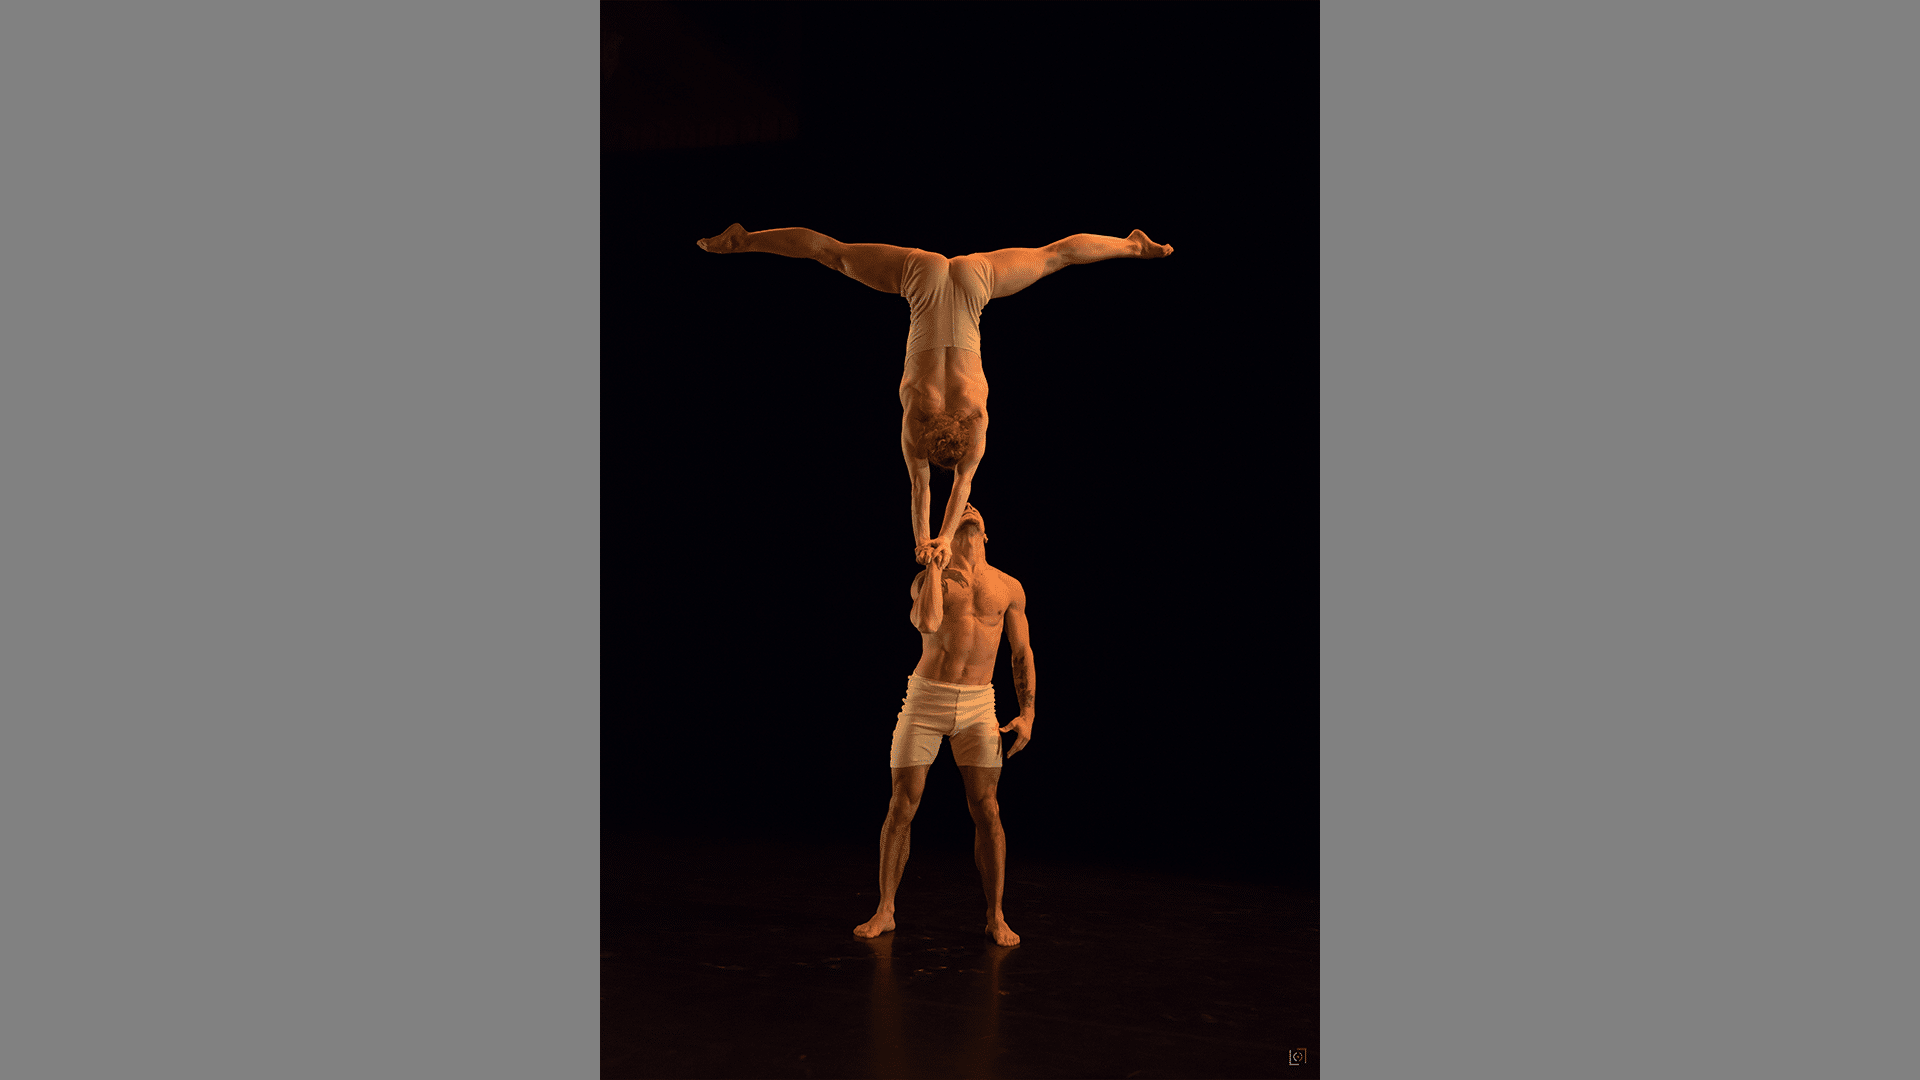 One acrobat holds another in a handstand with one arm.